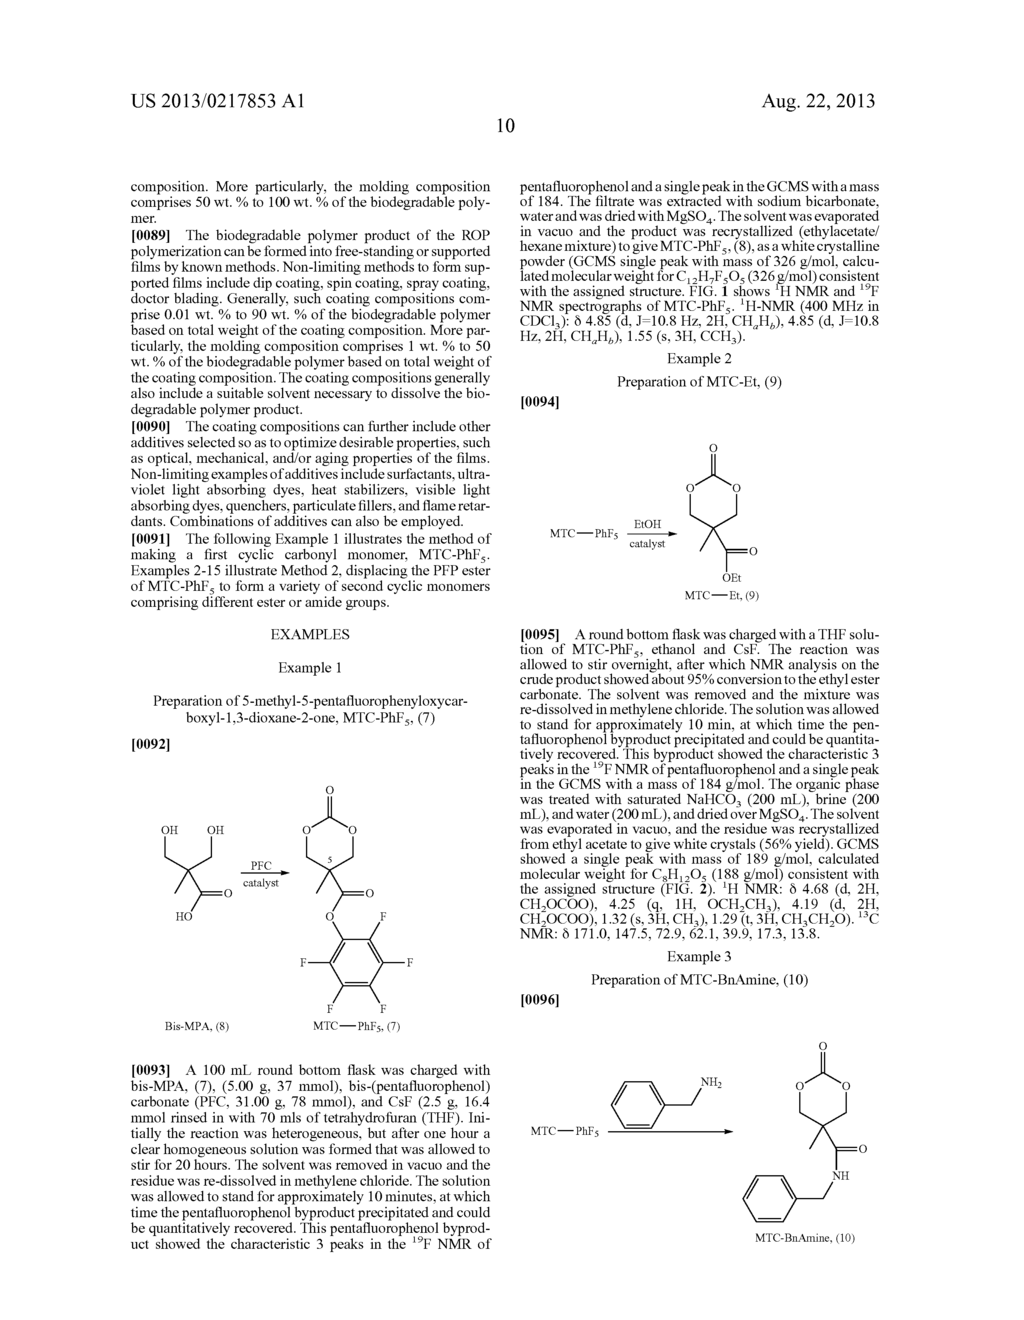 POLYMERS BEARING PENDANT PENTAFLUOROPHENYL ESTER GROUPS, AND METHODS OF     SYNTHESIS AND FUNCTIONALIZATION THEREOF - diagram, schematic, and image 25